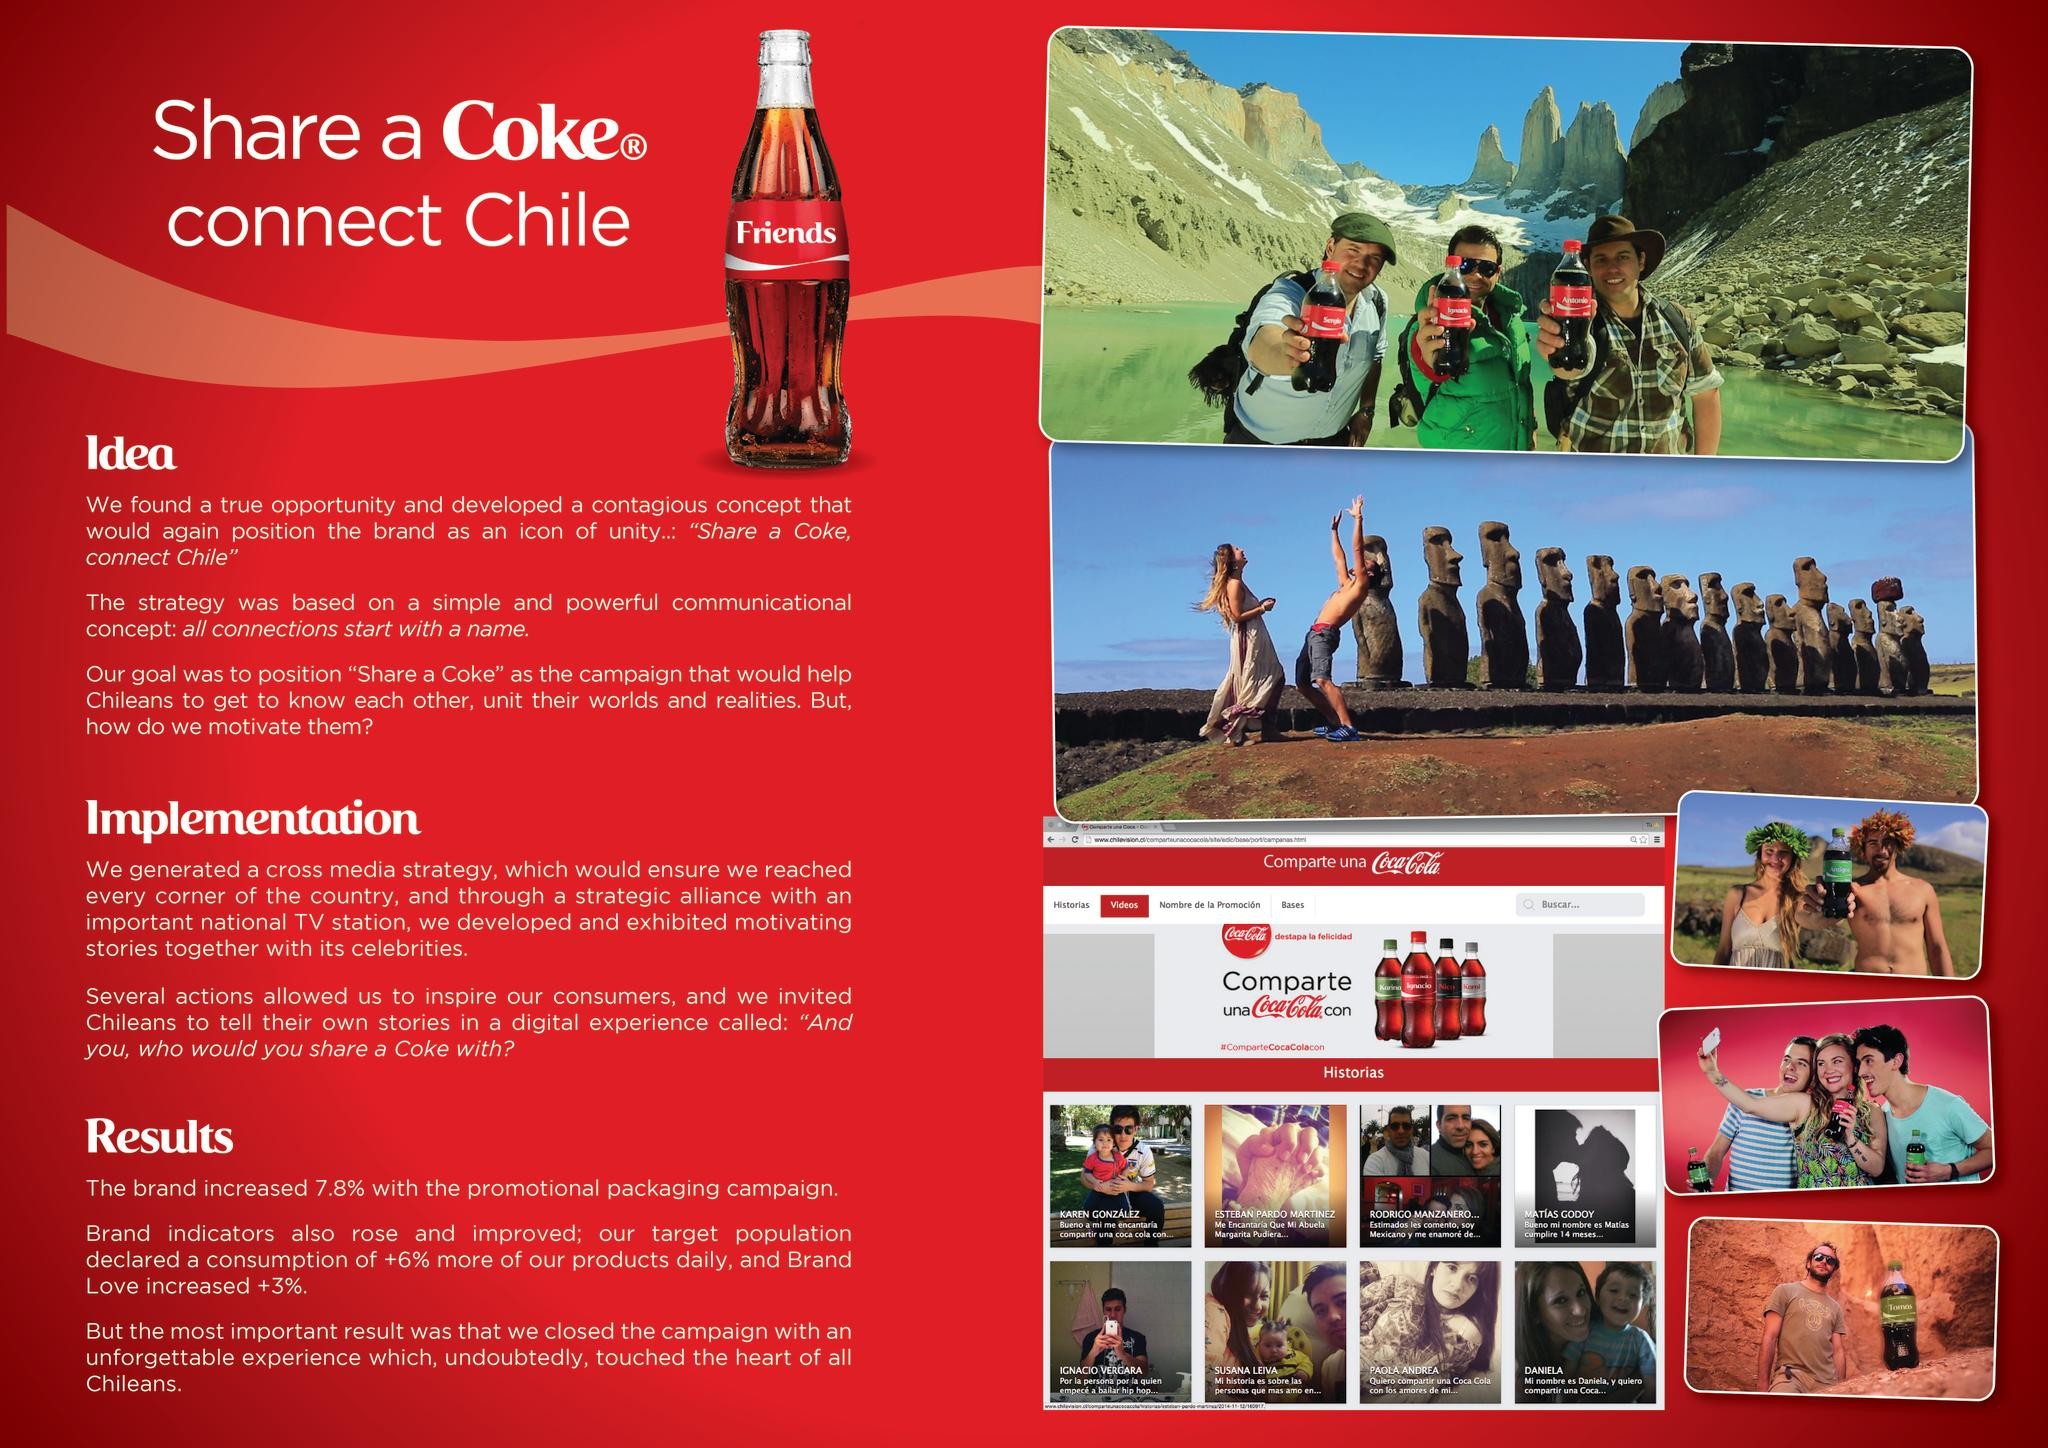 SHARE A COKE CONNECTS CHILE